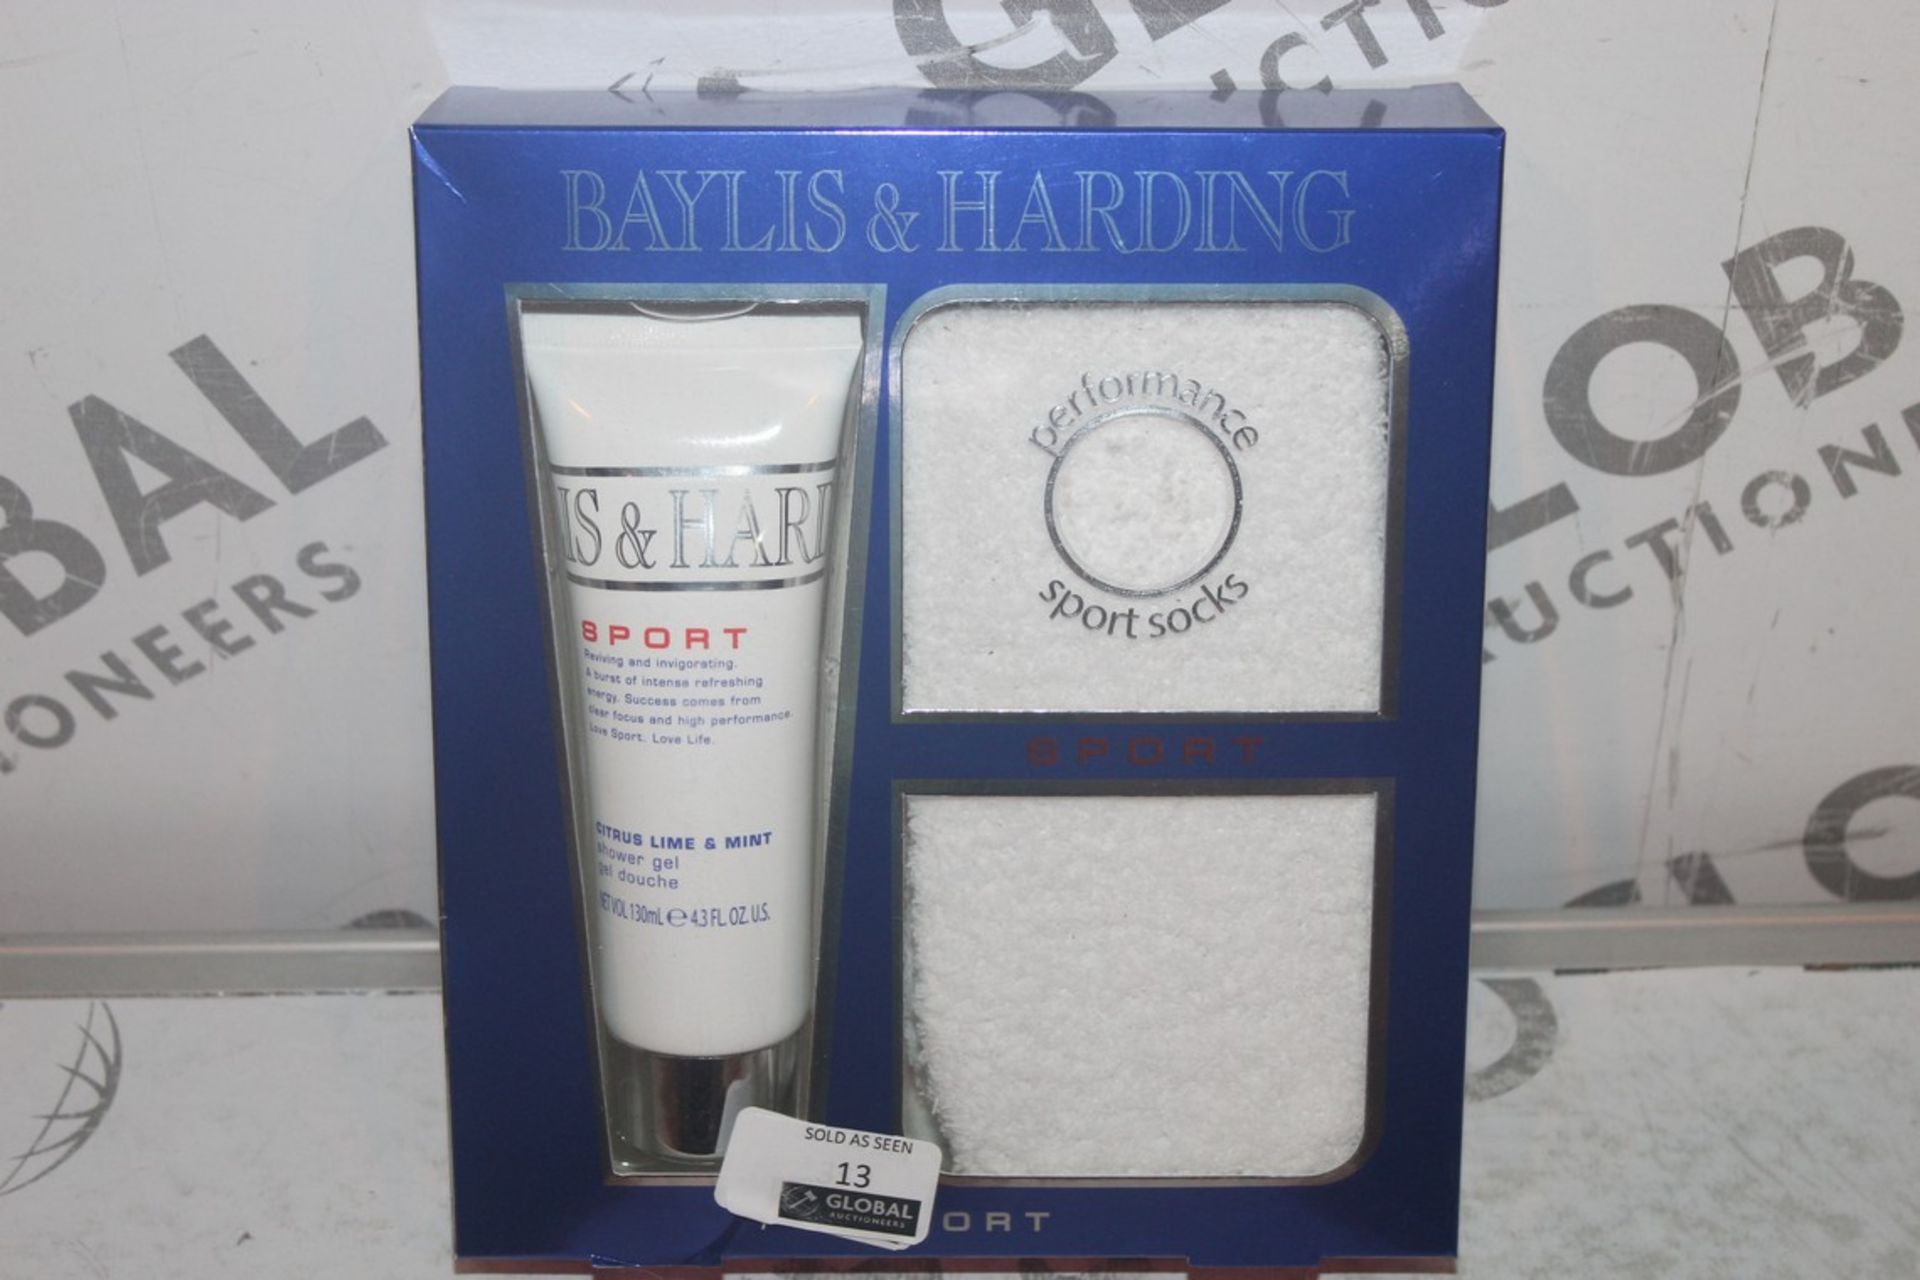 Lot to Contain 6 Brand New Boxed Bayliss and Harding Sport Citrus Lime and Mint Shower Gel Box